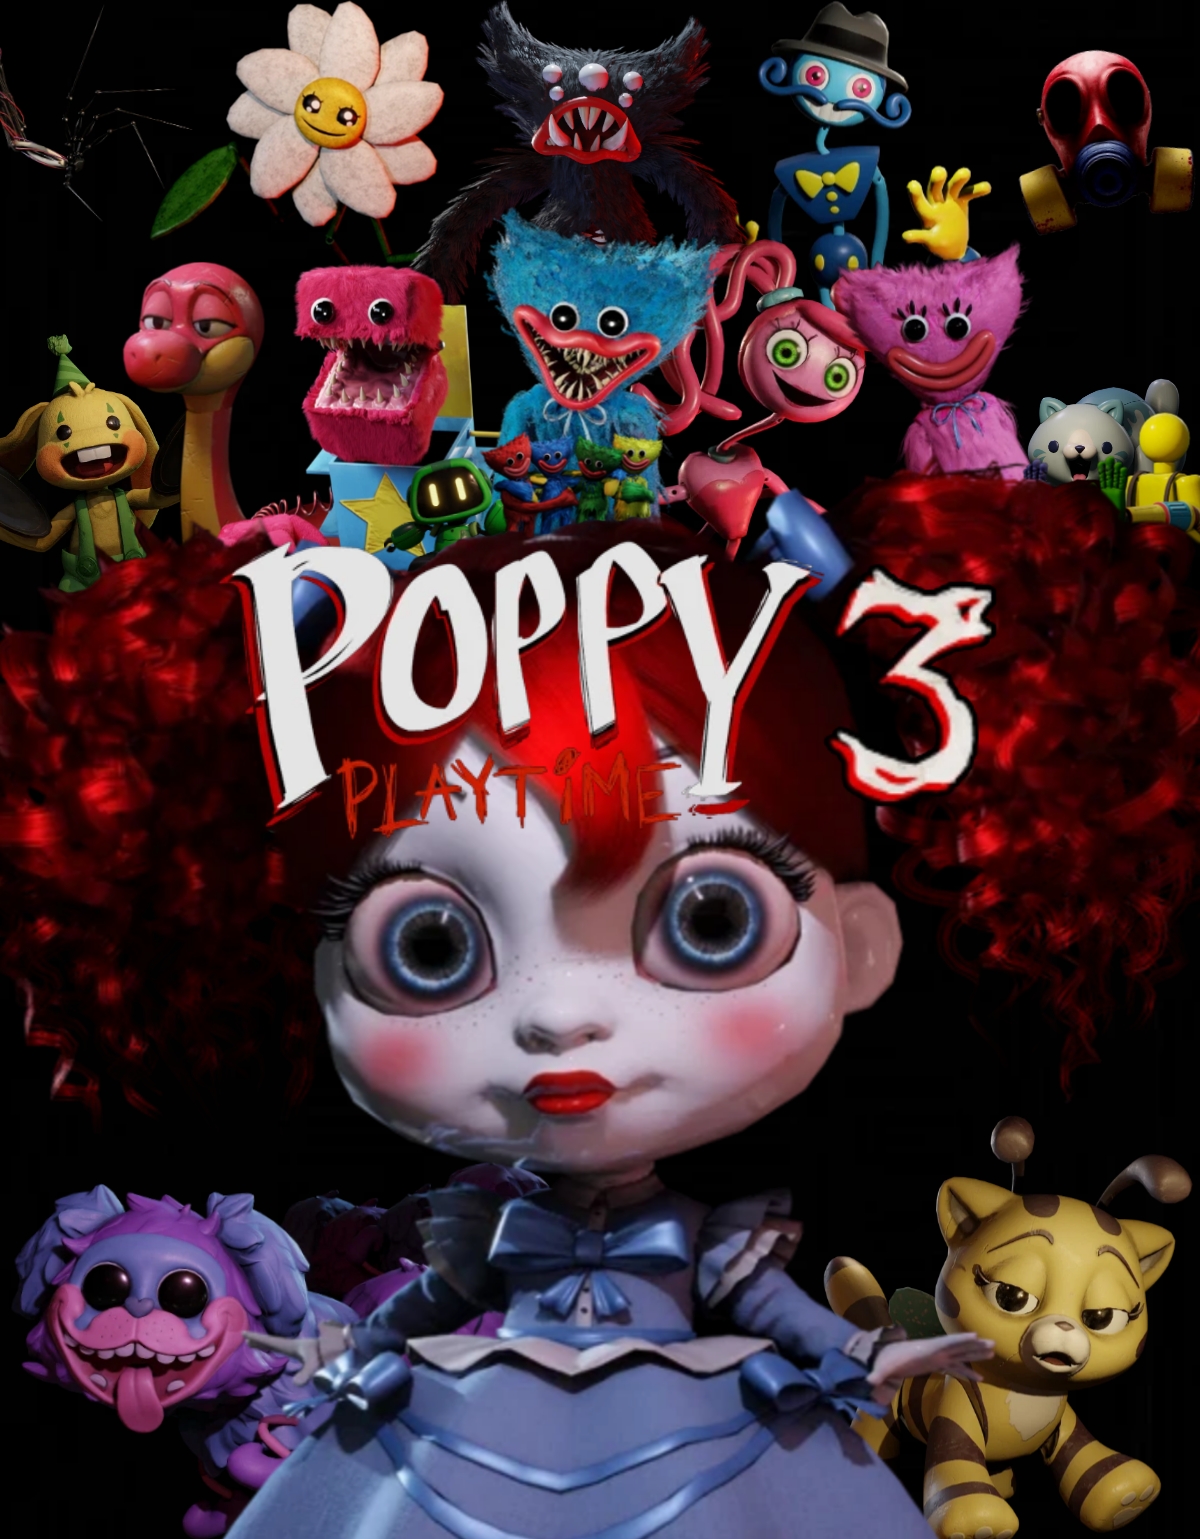 Poppy Playtime Chapter 3 Poster Fanmade